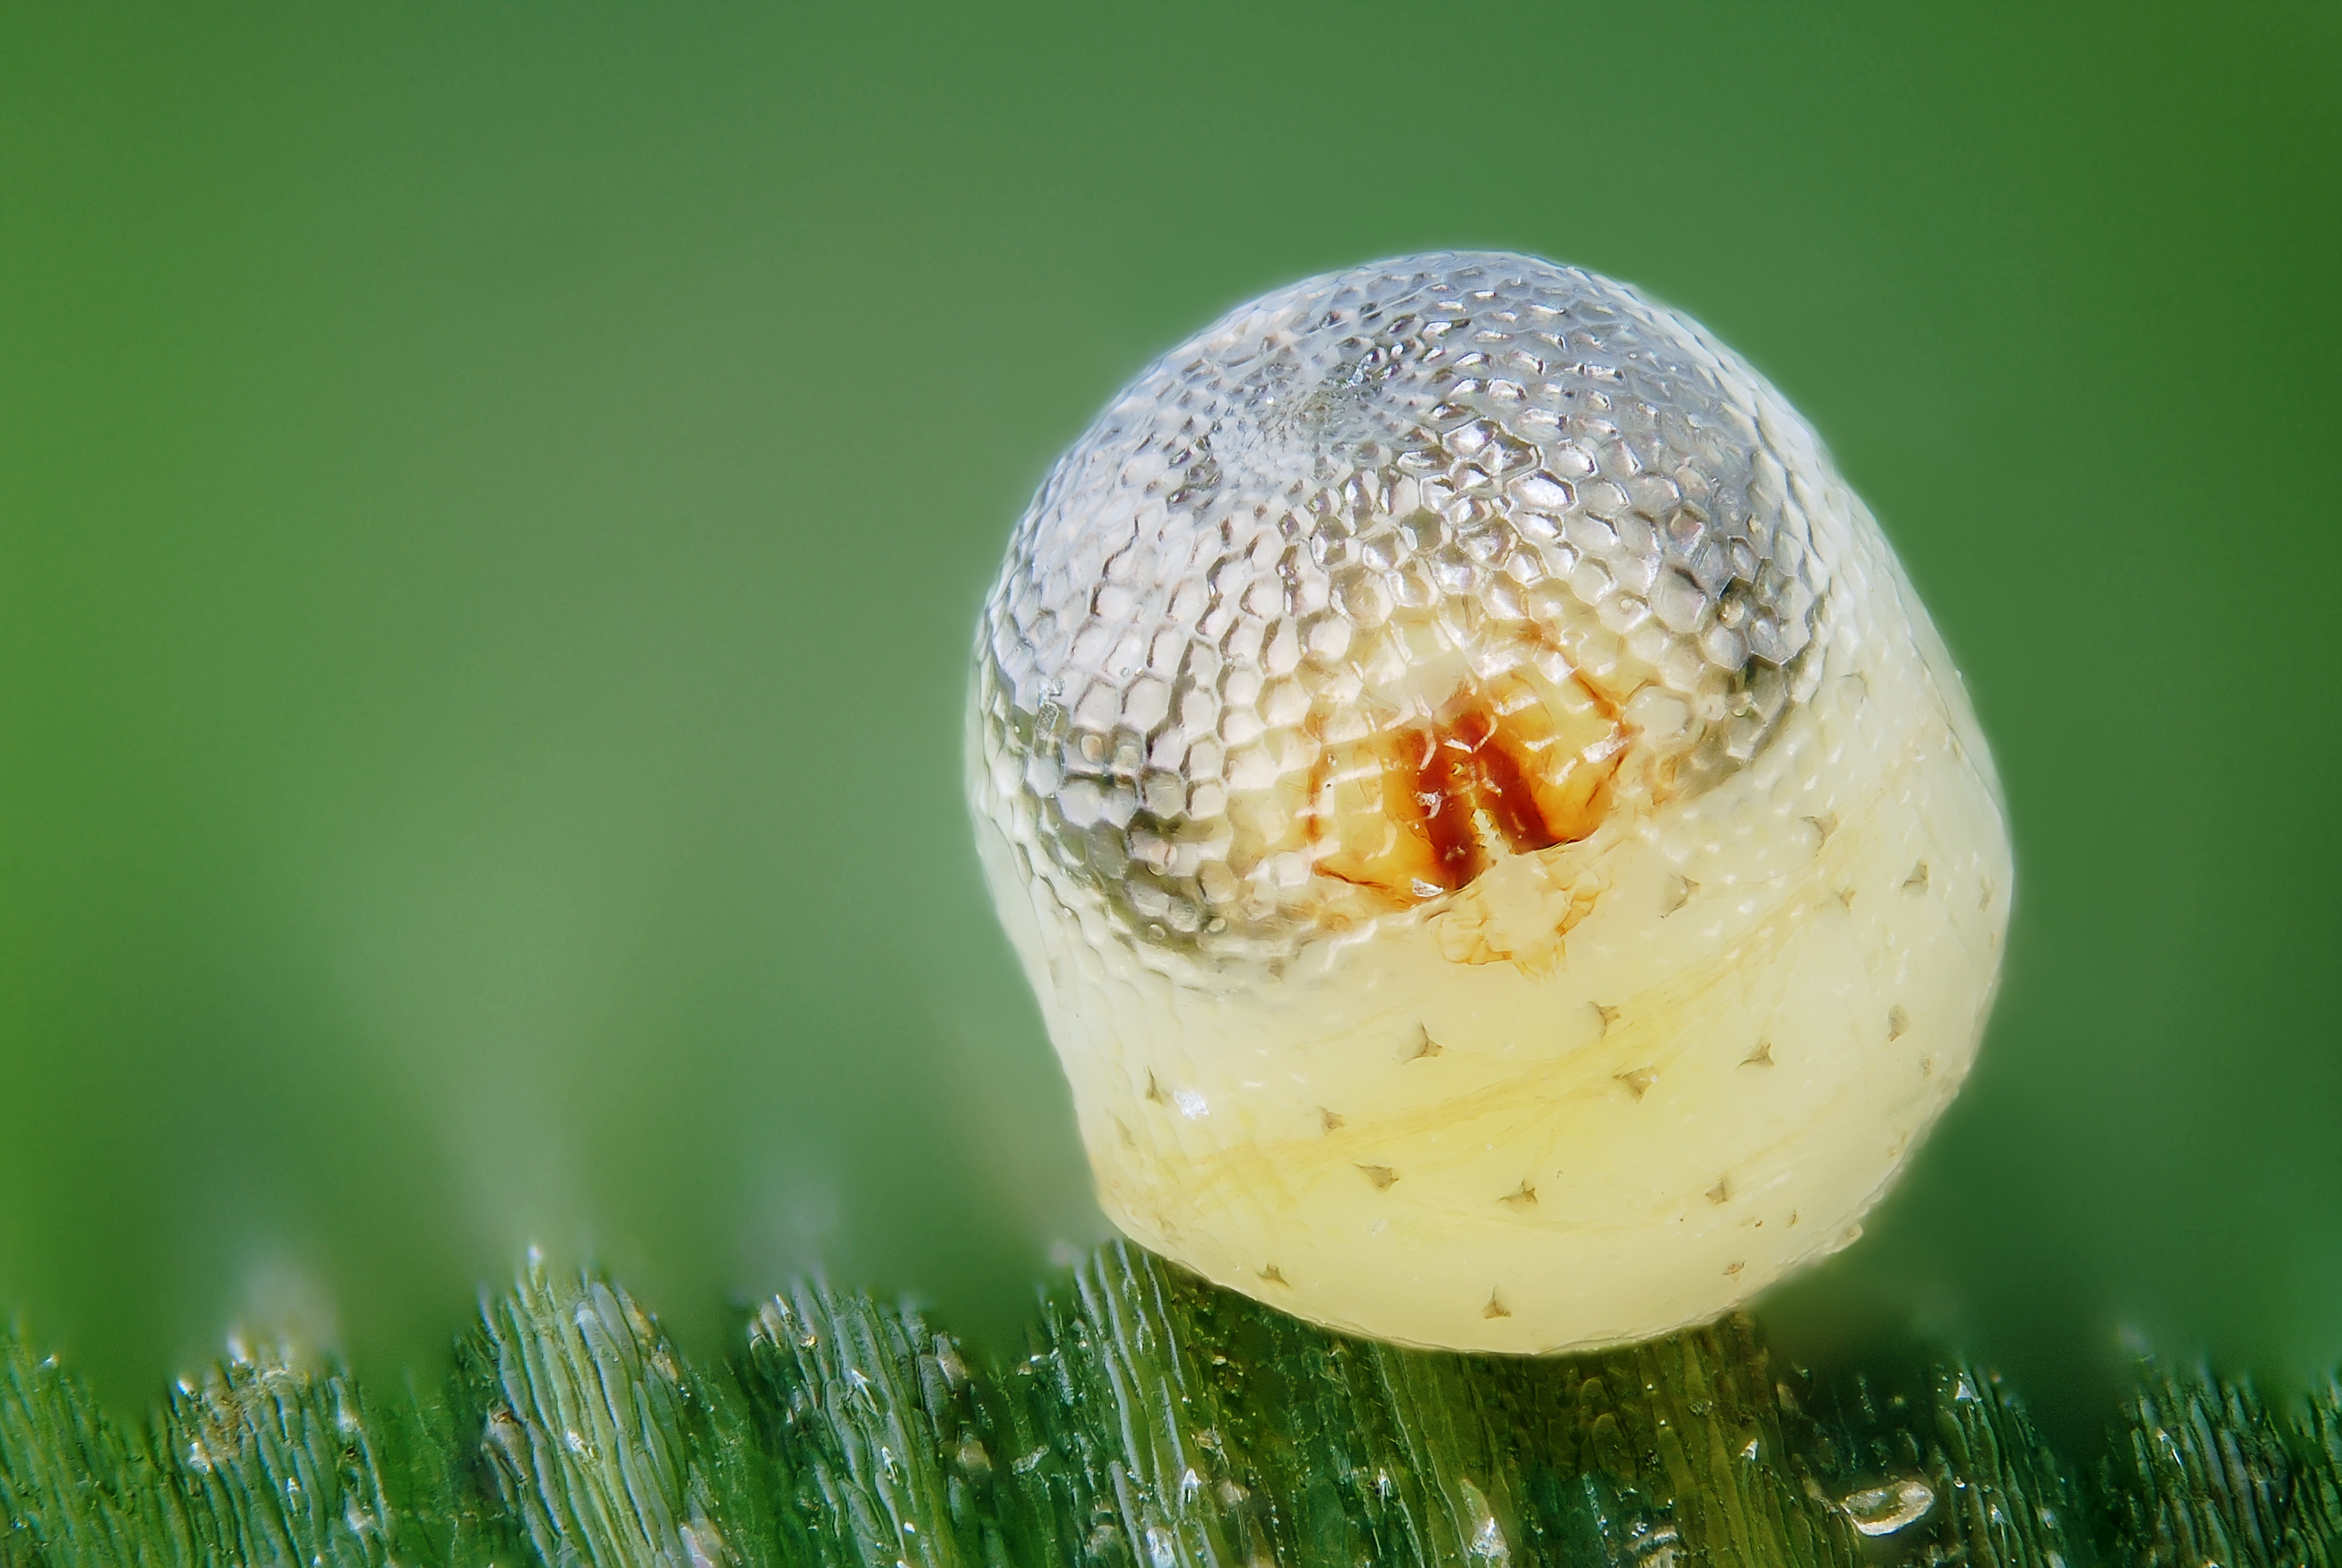 Pararge aegeria egg with embryo